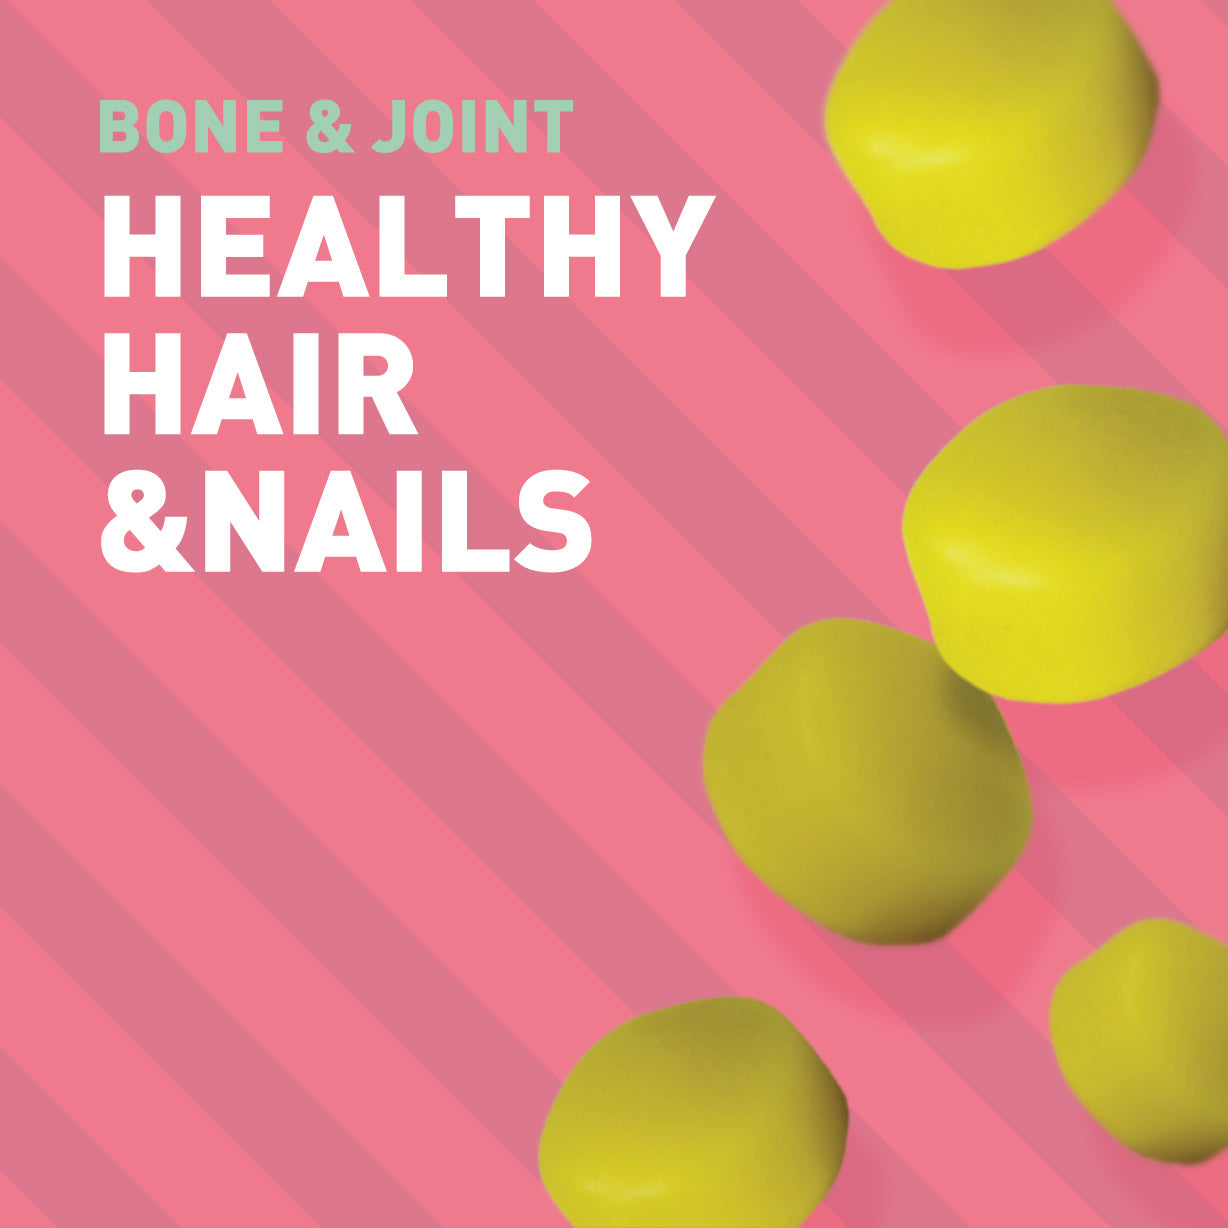 marine collagen chewable supplement to help support healthy hair and nails